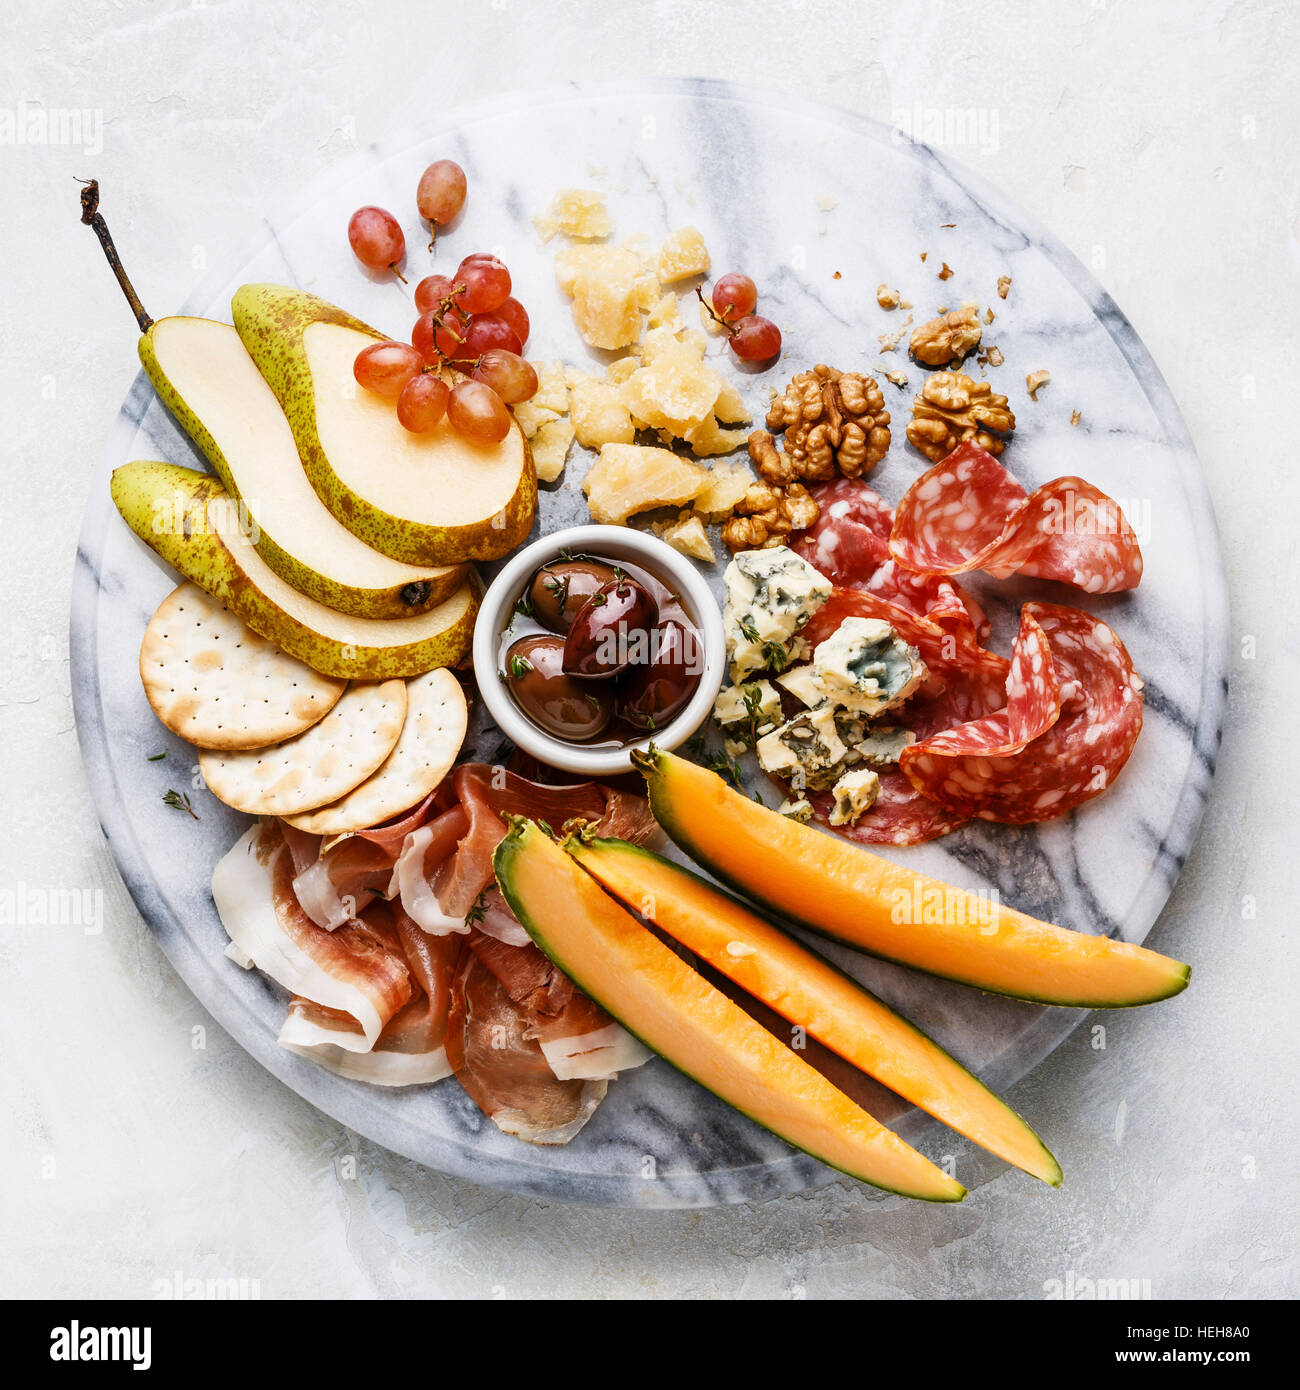 Meat and cheese plate antipasti snack with Prosciutto ham, Salami, Parmesan, Blue cheese, Cantaloupe melon and Olives on marble board Stock Photo